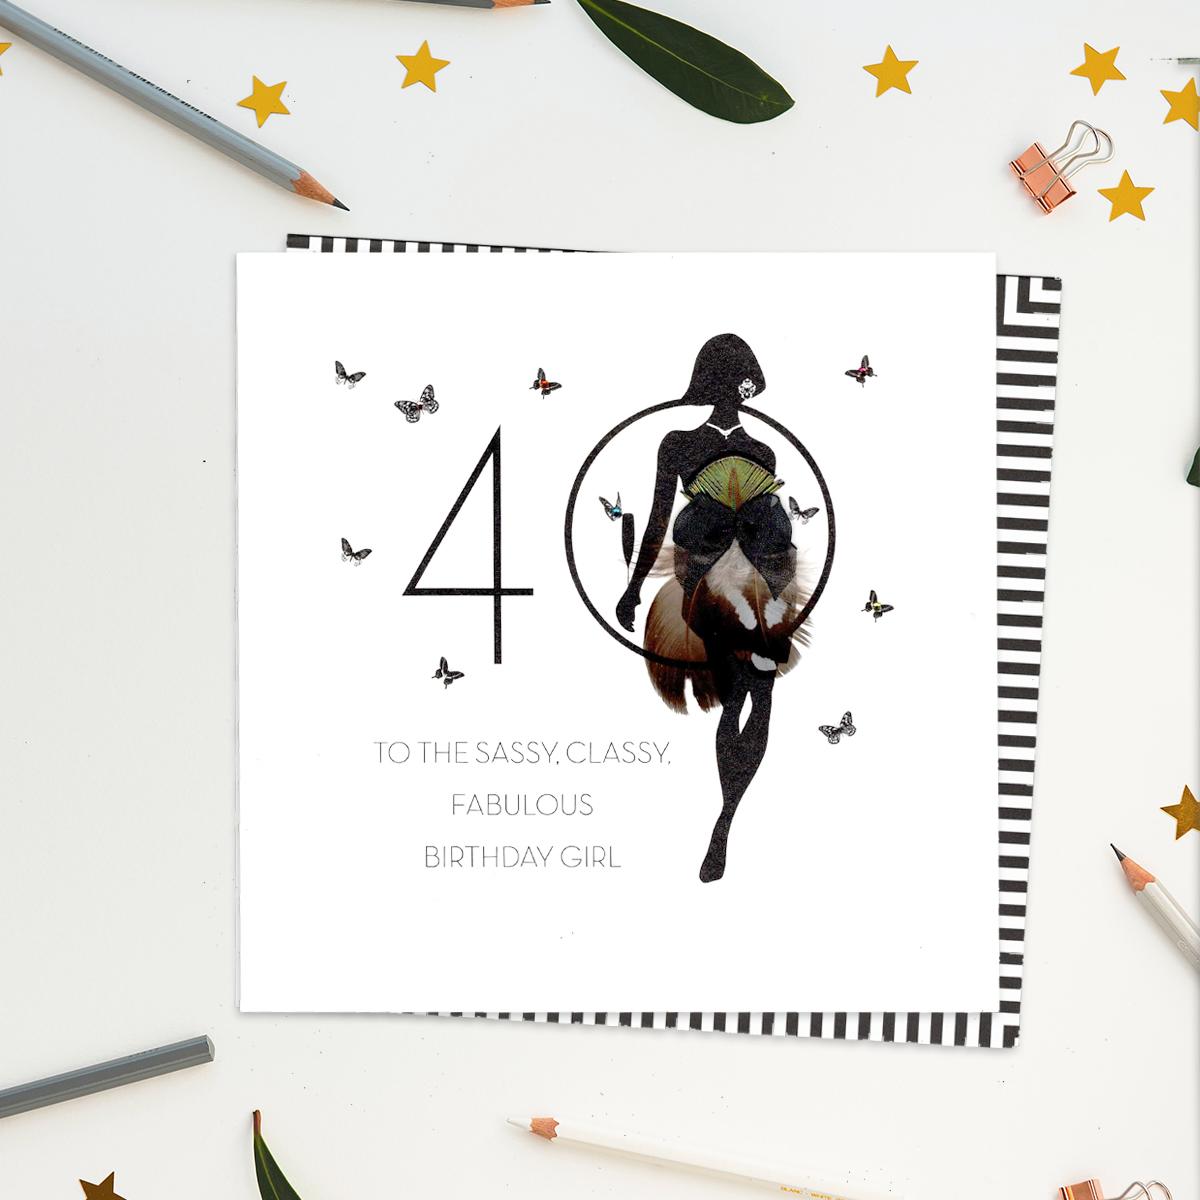 A stunning, luxury, handcrafted card with gem embellishments and feathers from Five Dollar Shake. Showing A Woman In Black Silhouette Standing In Front Of The Number 40. Caption: 'To The Sassy, Classy, Fabulous Birthday Girl'. Blank Inside For Your Own Message. Complete With White Envelope With Black and White Striped Border.